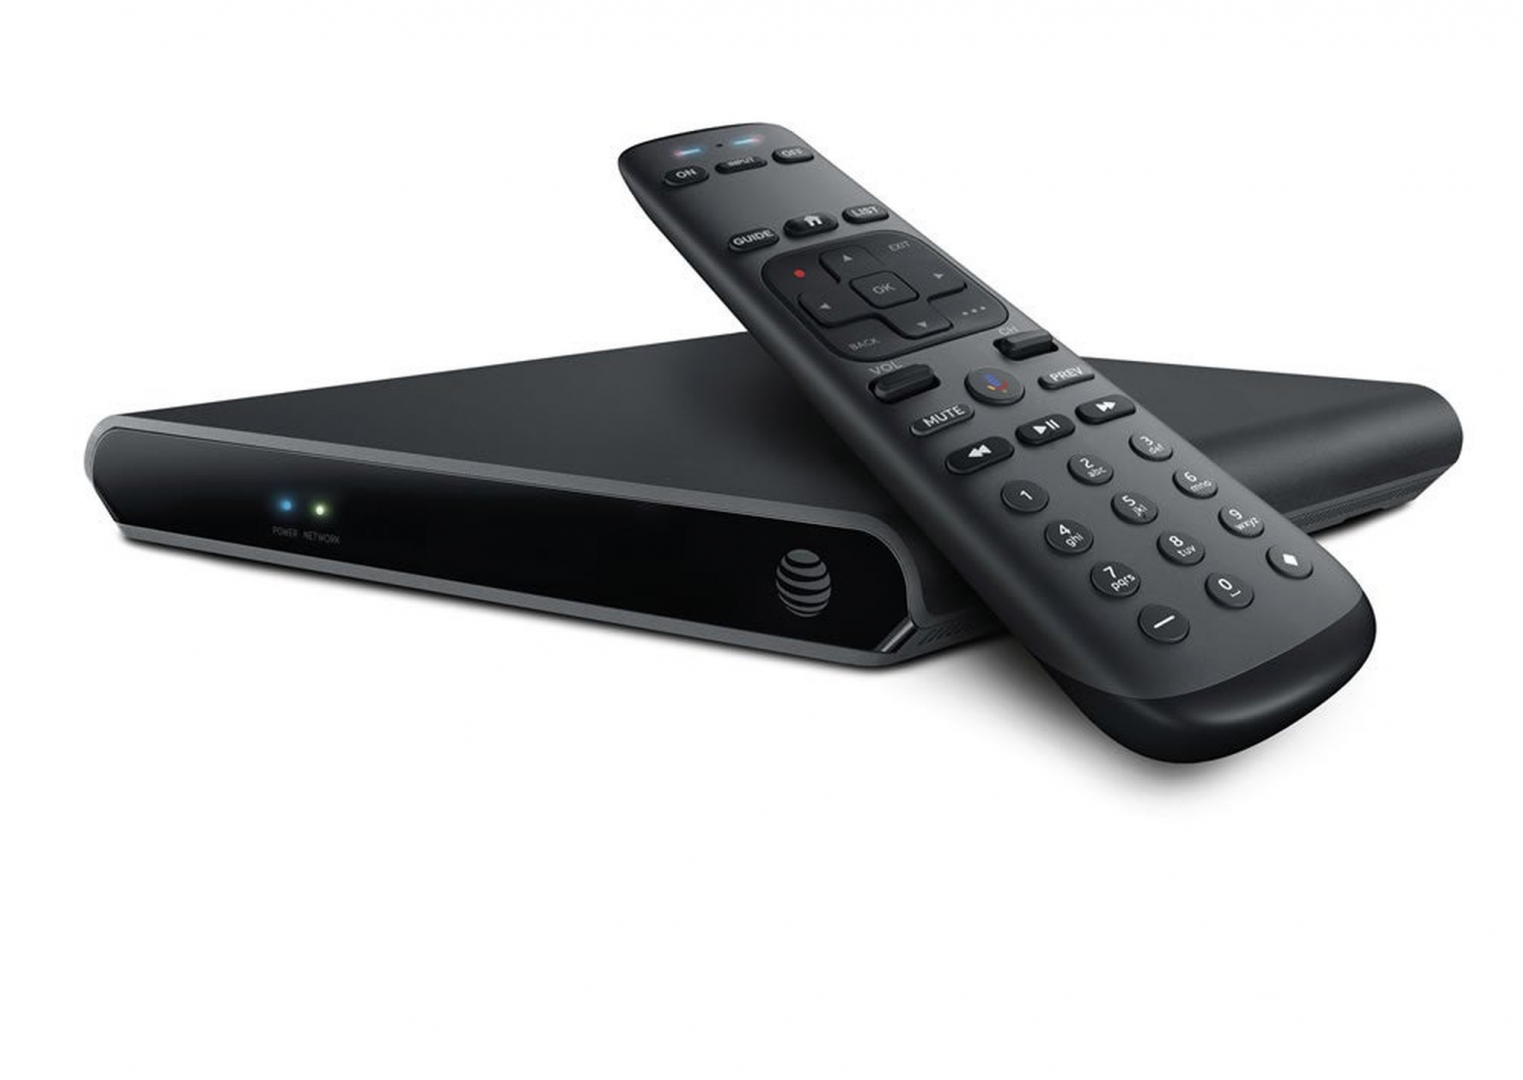 The AT&T TV set-top-box and remote.